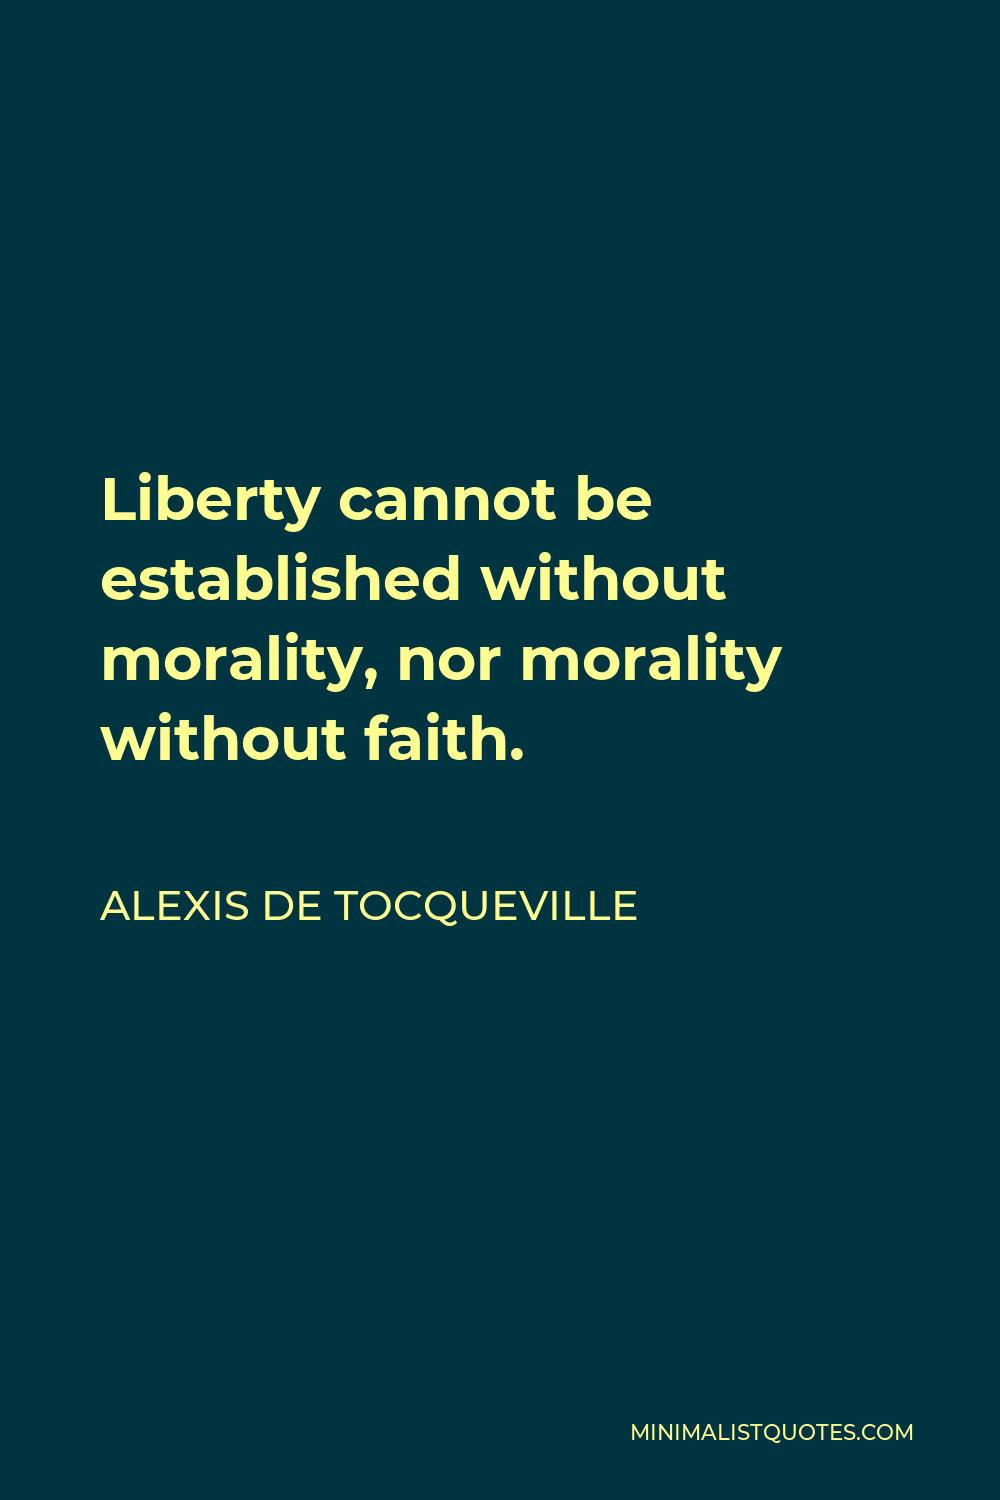 Alexis de Tocqueville Quote - Liberty cannot be established without morality, nor morality without faith.